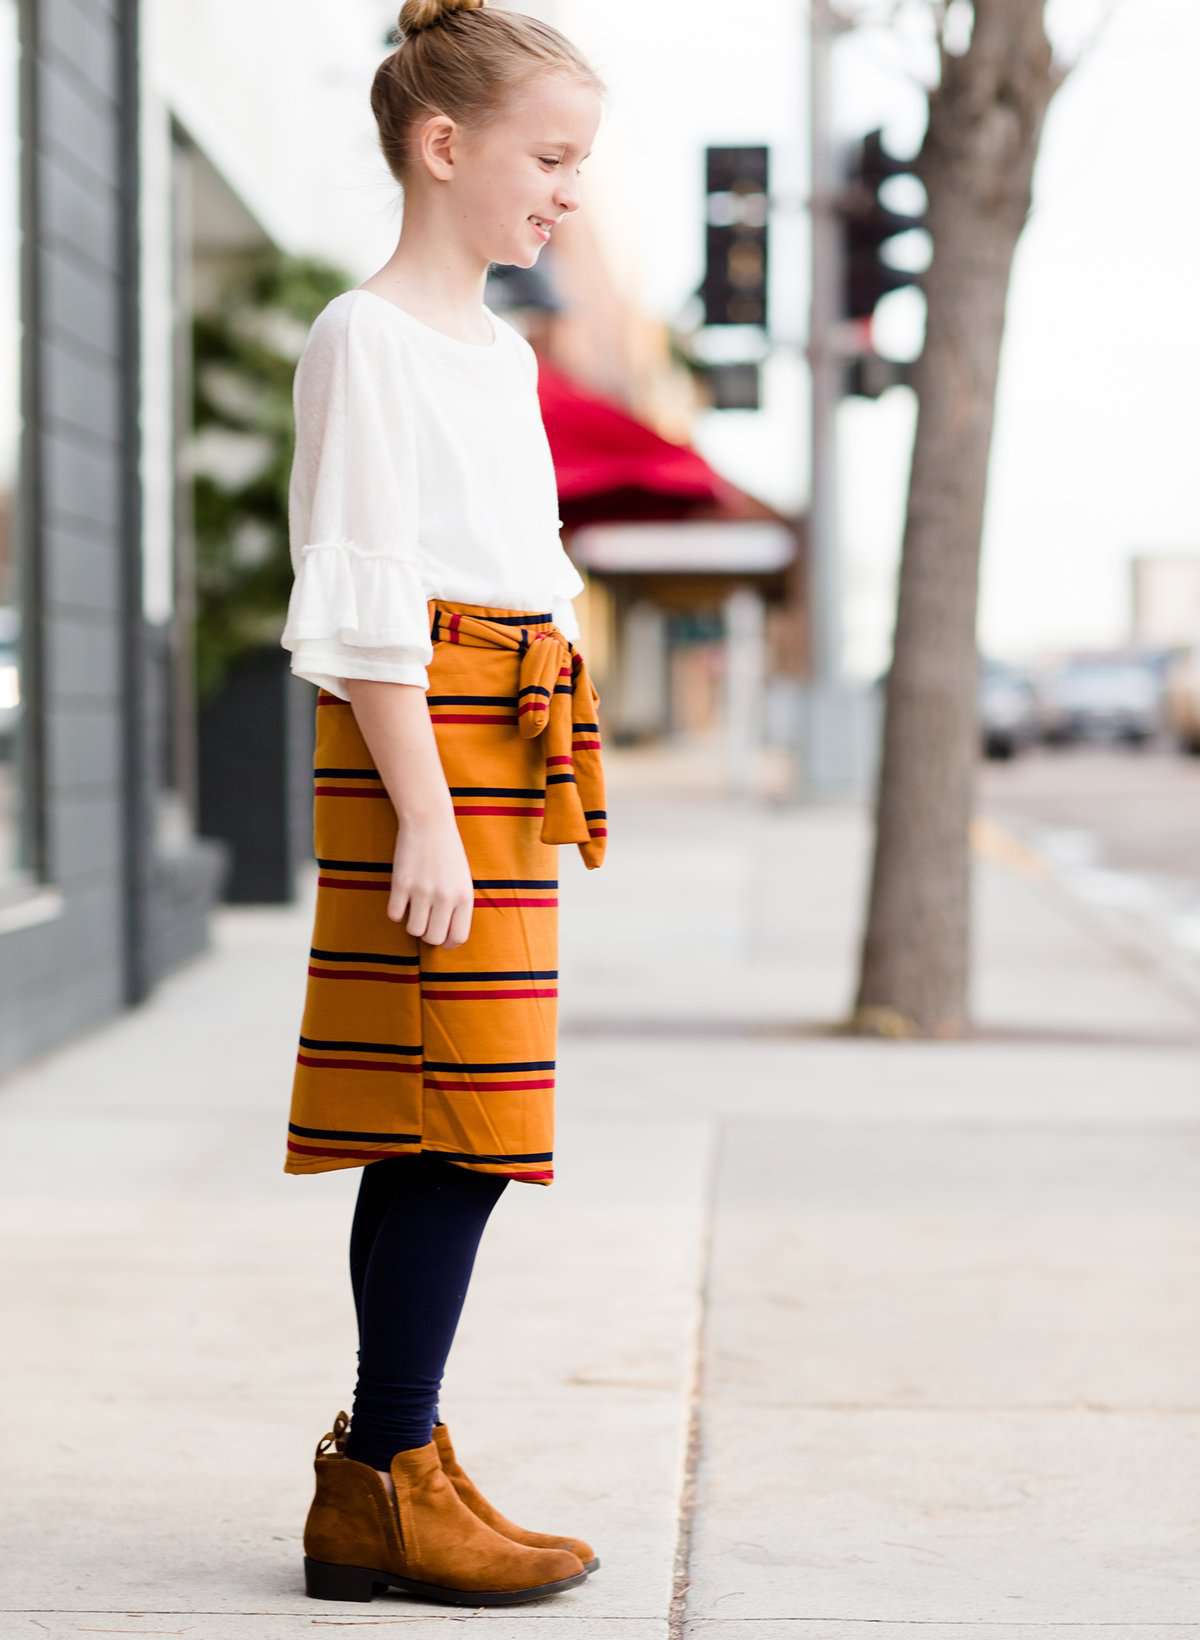 Young girl wearing an ivory, oversized modest top with ruffle sleeve accents. This top is also paired with a mustard, striped below the knee skirt and short boots.